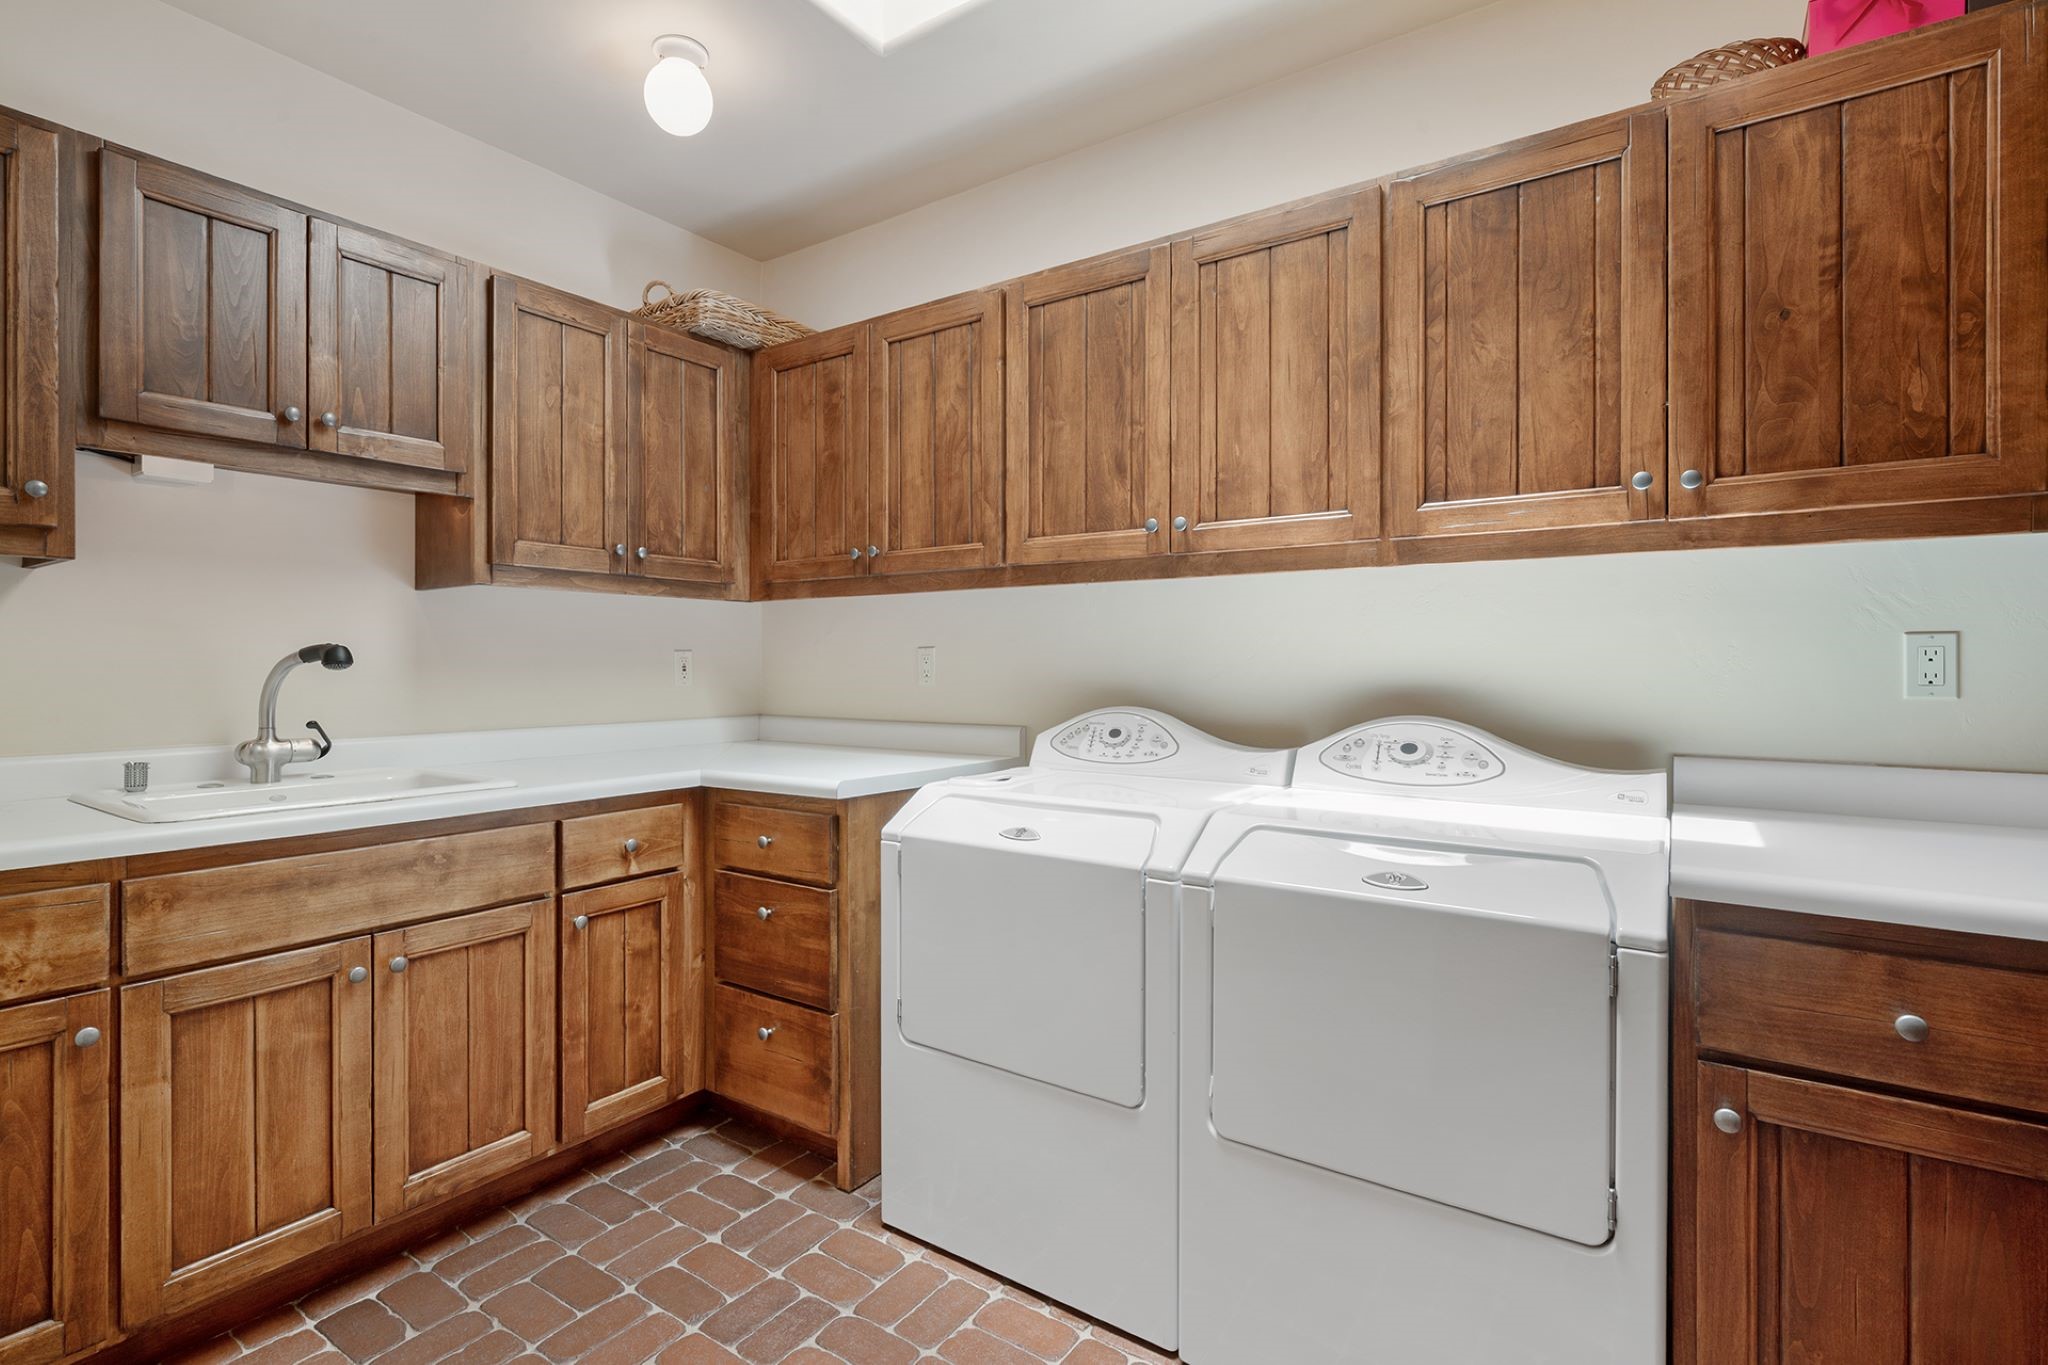 Laundry room sink with upper and lower cabinets.